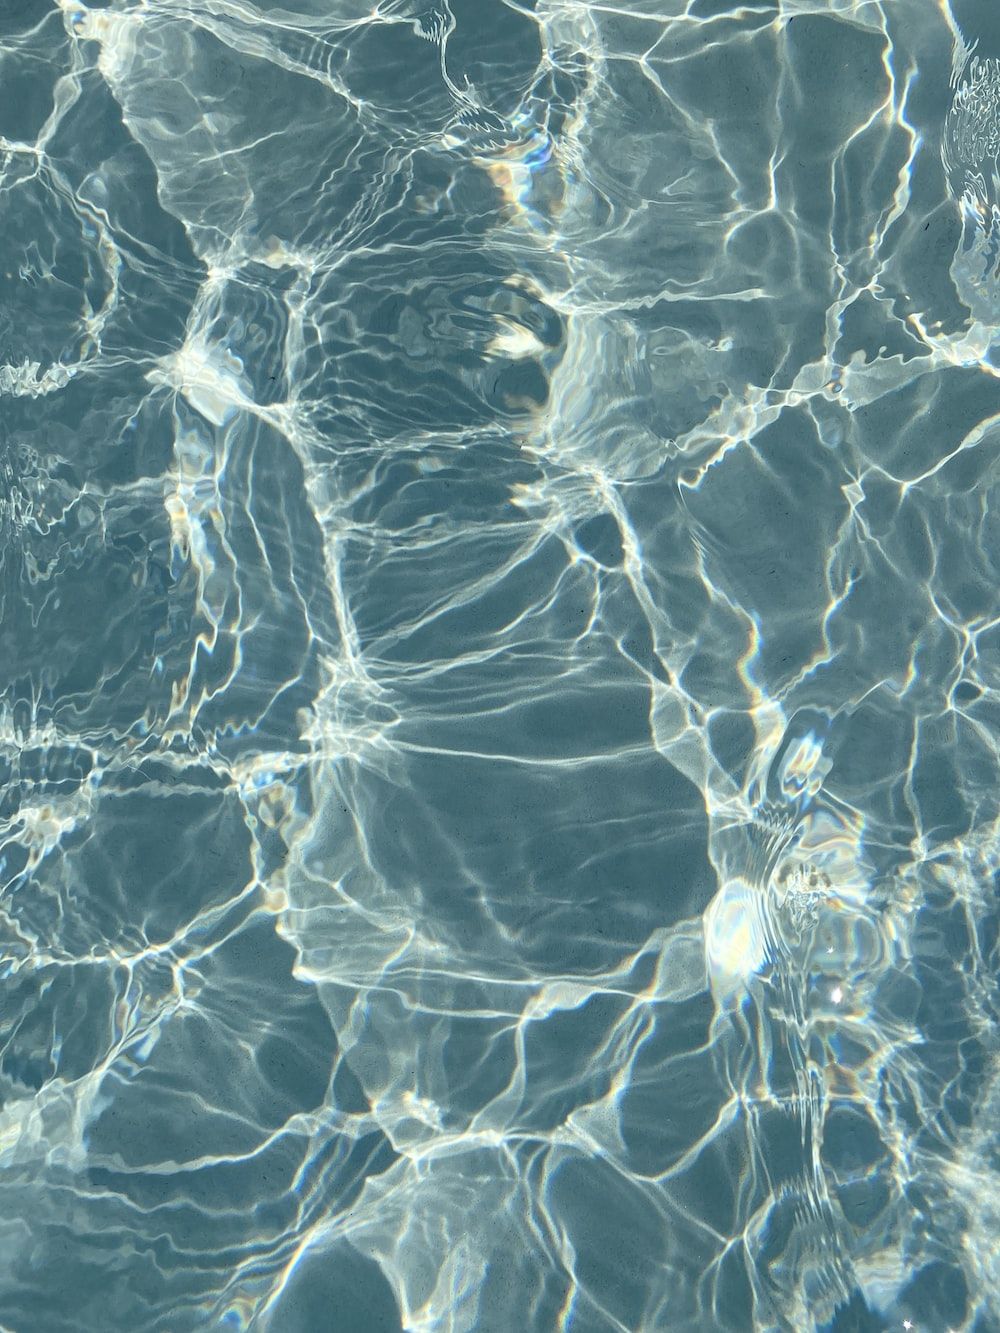 Water in a pool with light reflecting on it - Bling